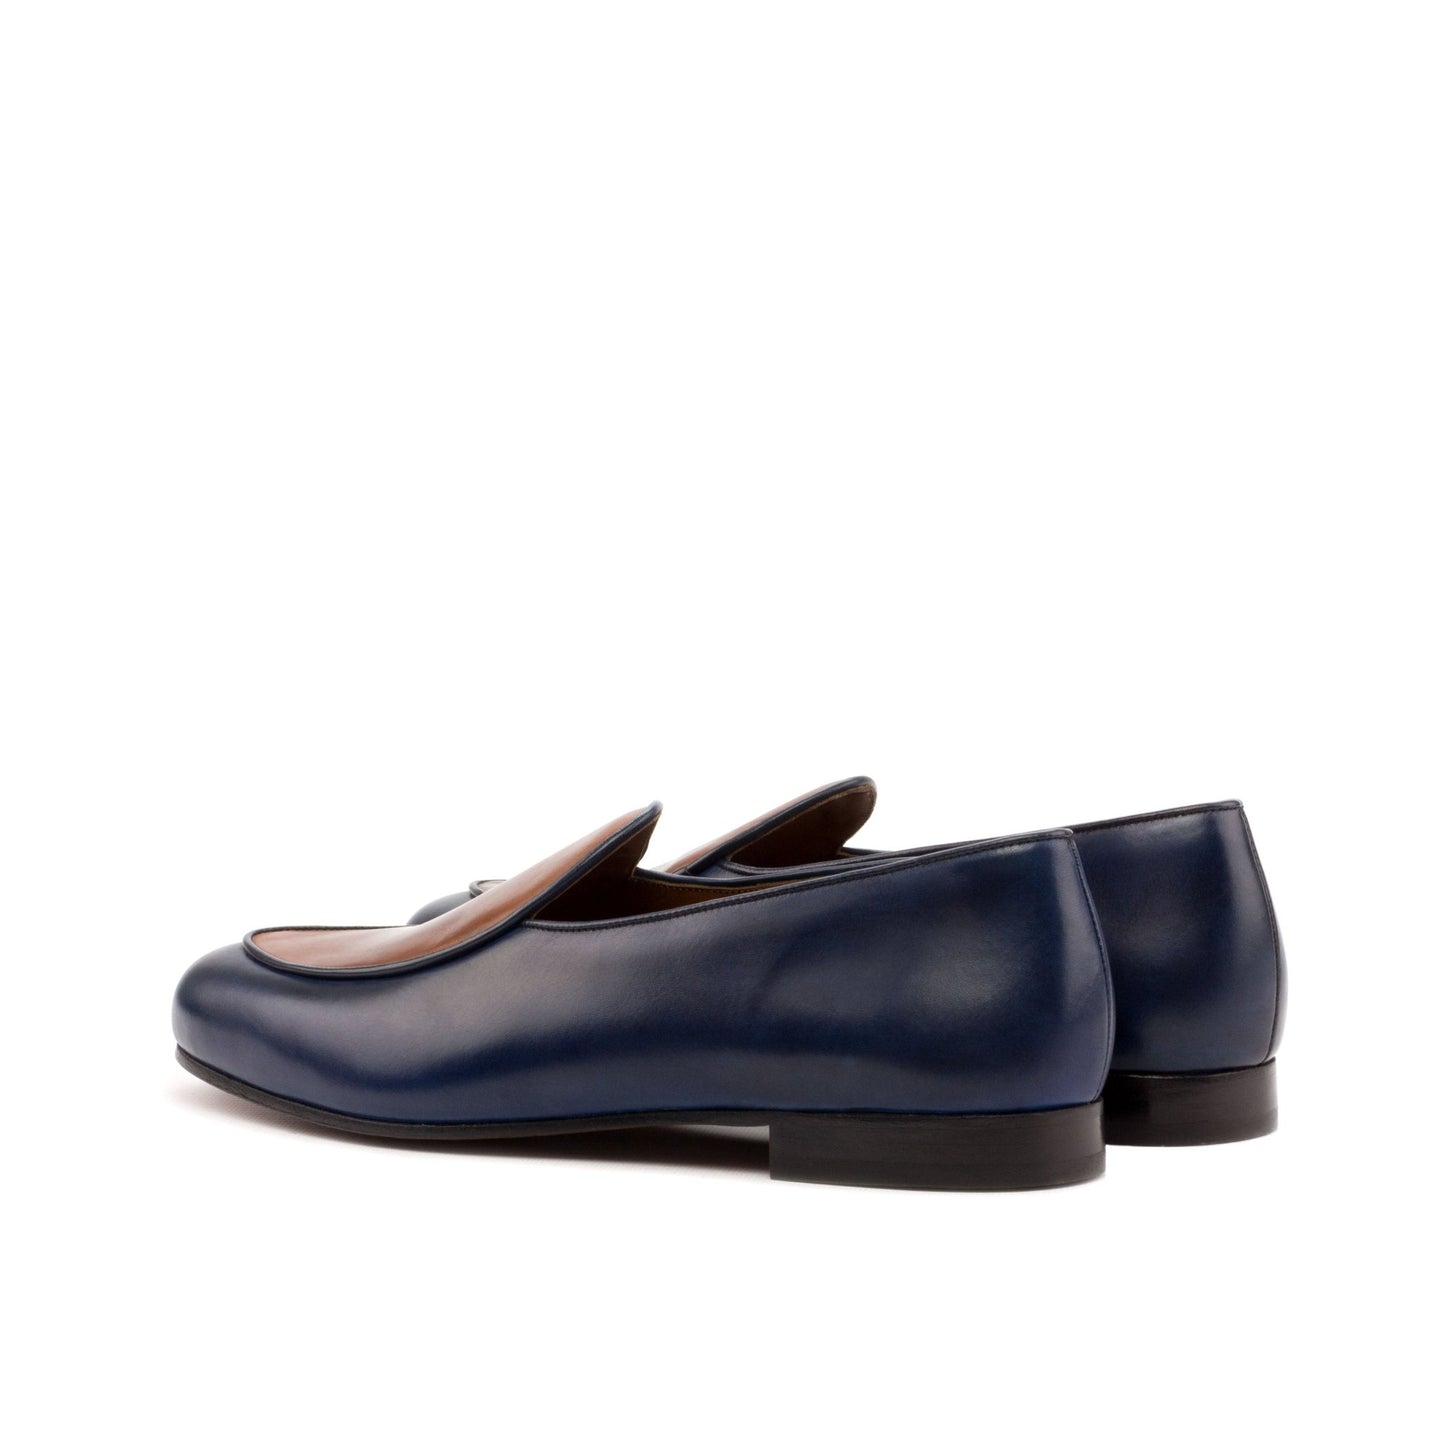 Belgian Slipper in Brown Calf and Navy Calf - Zatorres | Free Shipping on orders over $200